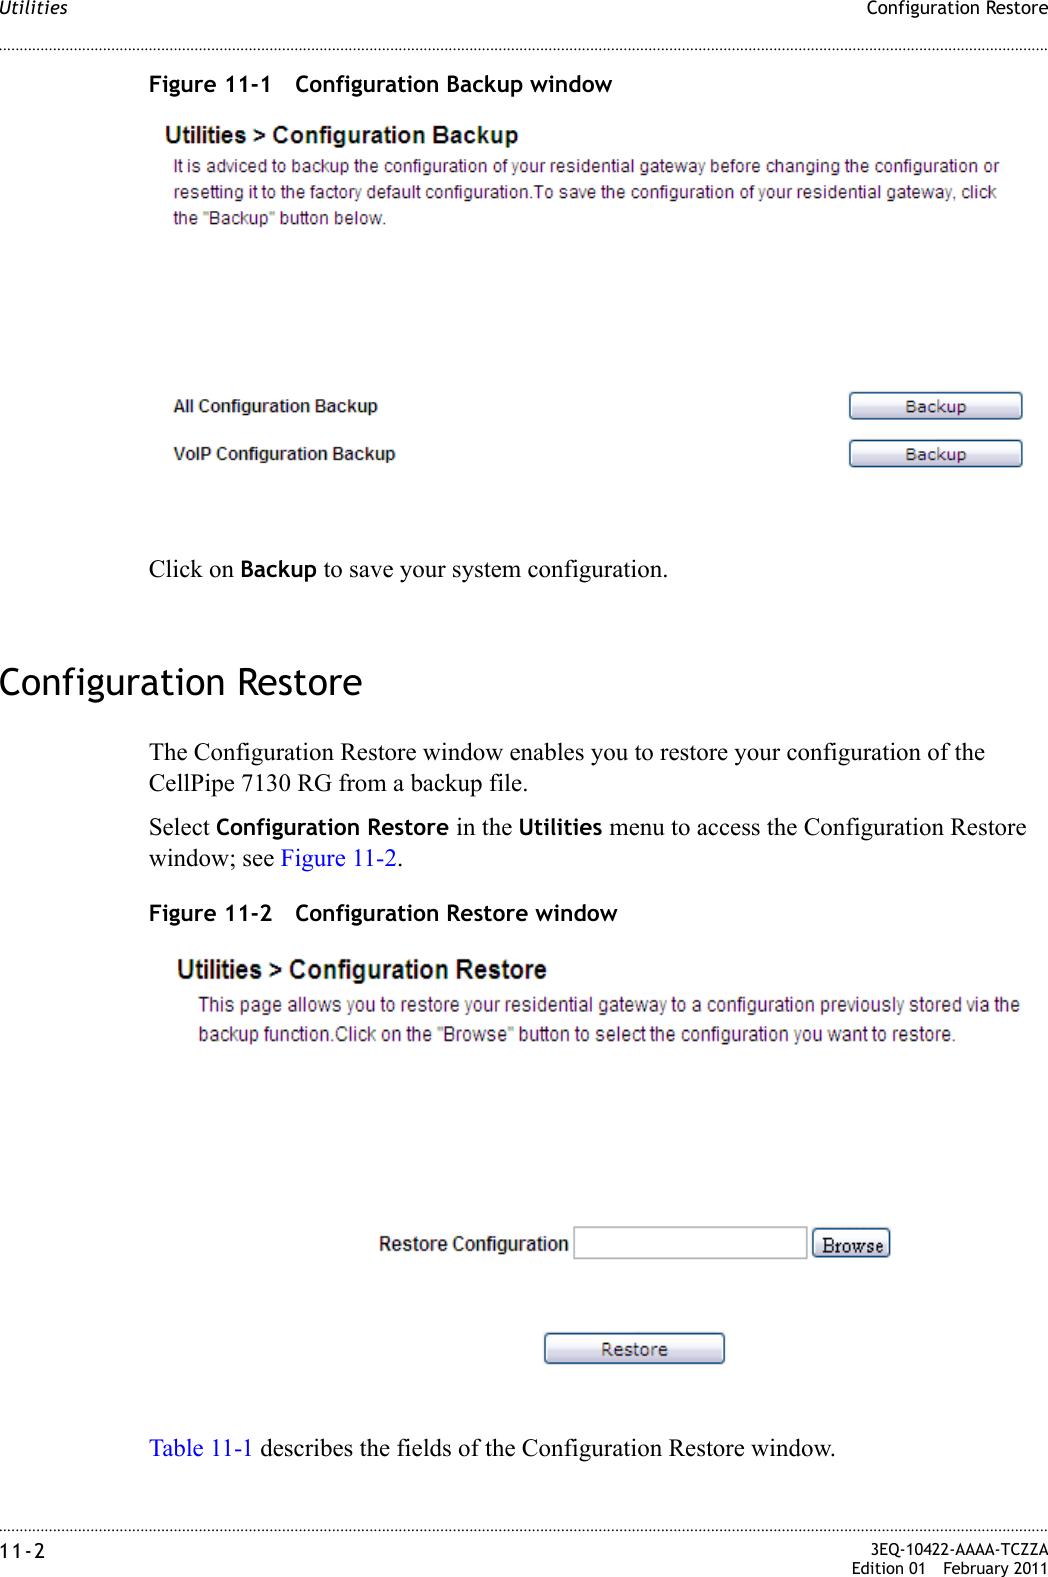 ............................................................................................................................................................................................................................................................Configuration RestoreUtilities11-2  3EQ-10422-AAAA-TCZZAEdition 01 February 2011............................................................................................................................................................................................................................................................Figure 11-1 Configuration Backup windowClick on Backup to save your system configuration.Configuration RestoreThe Configuration Restore window enables you to restore your configuration of the CellPipe 7130 RG from a backup file.Select Configuration Restore in the Utilities menu to access the Configuration Restore window; see Figure 11-2.Figure 11-2 Configuration Restore windowTable 11-1 describes the fields of the Configuration Restore window.